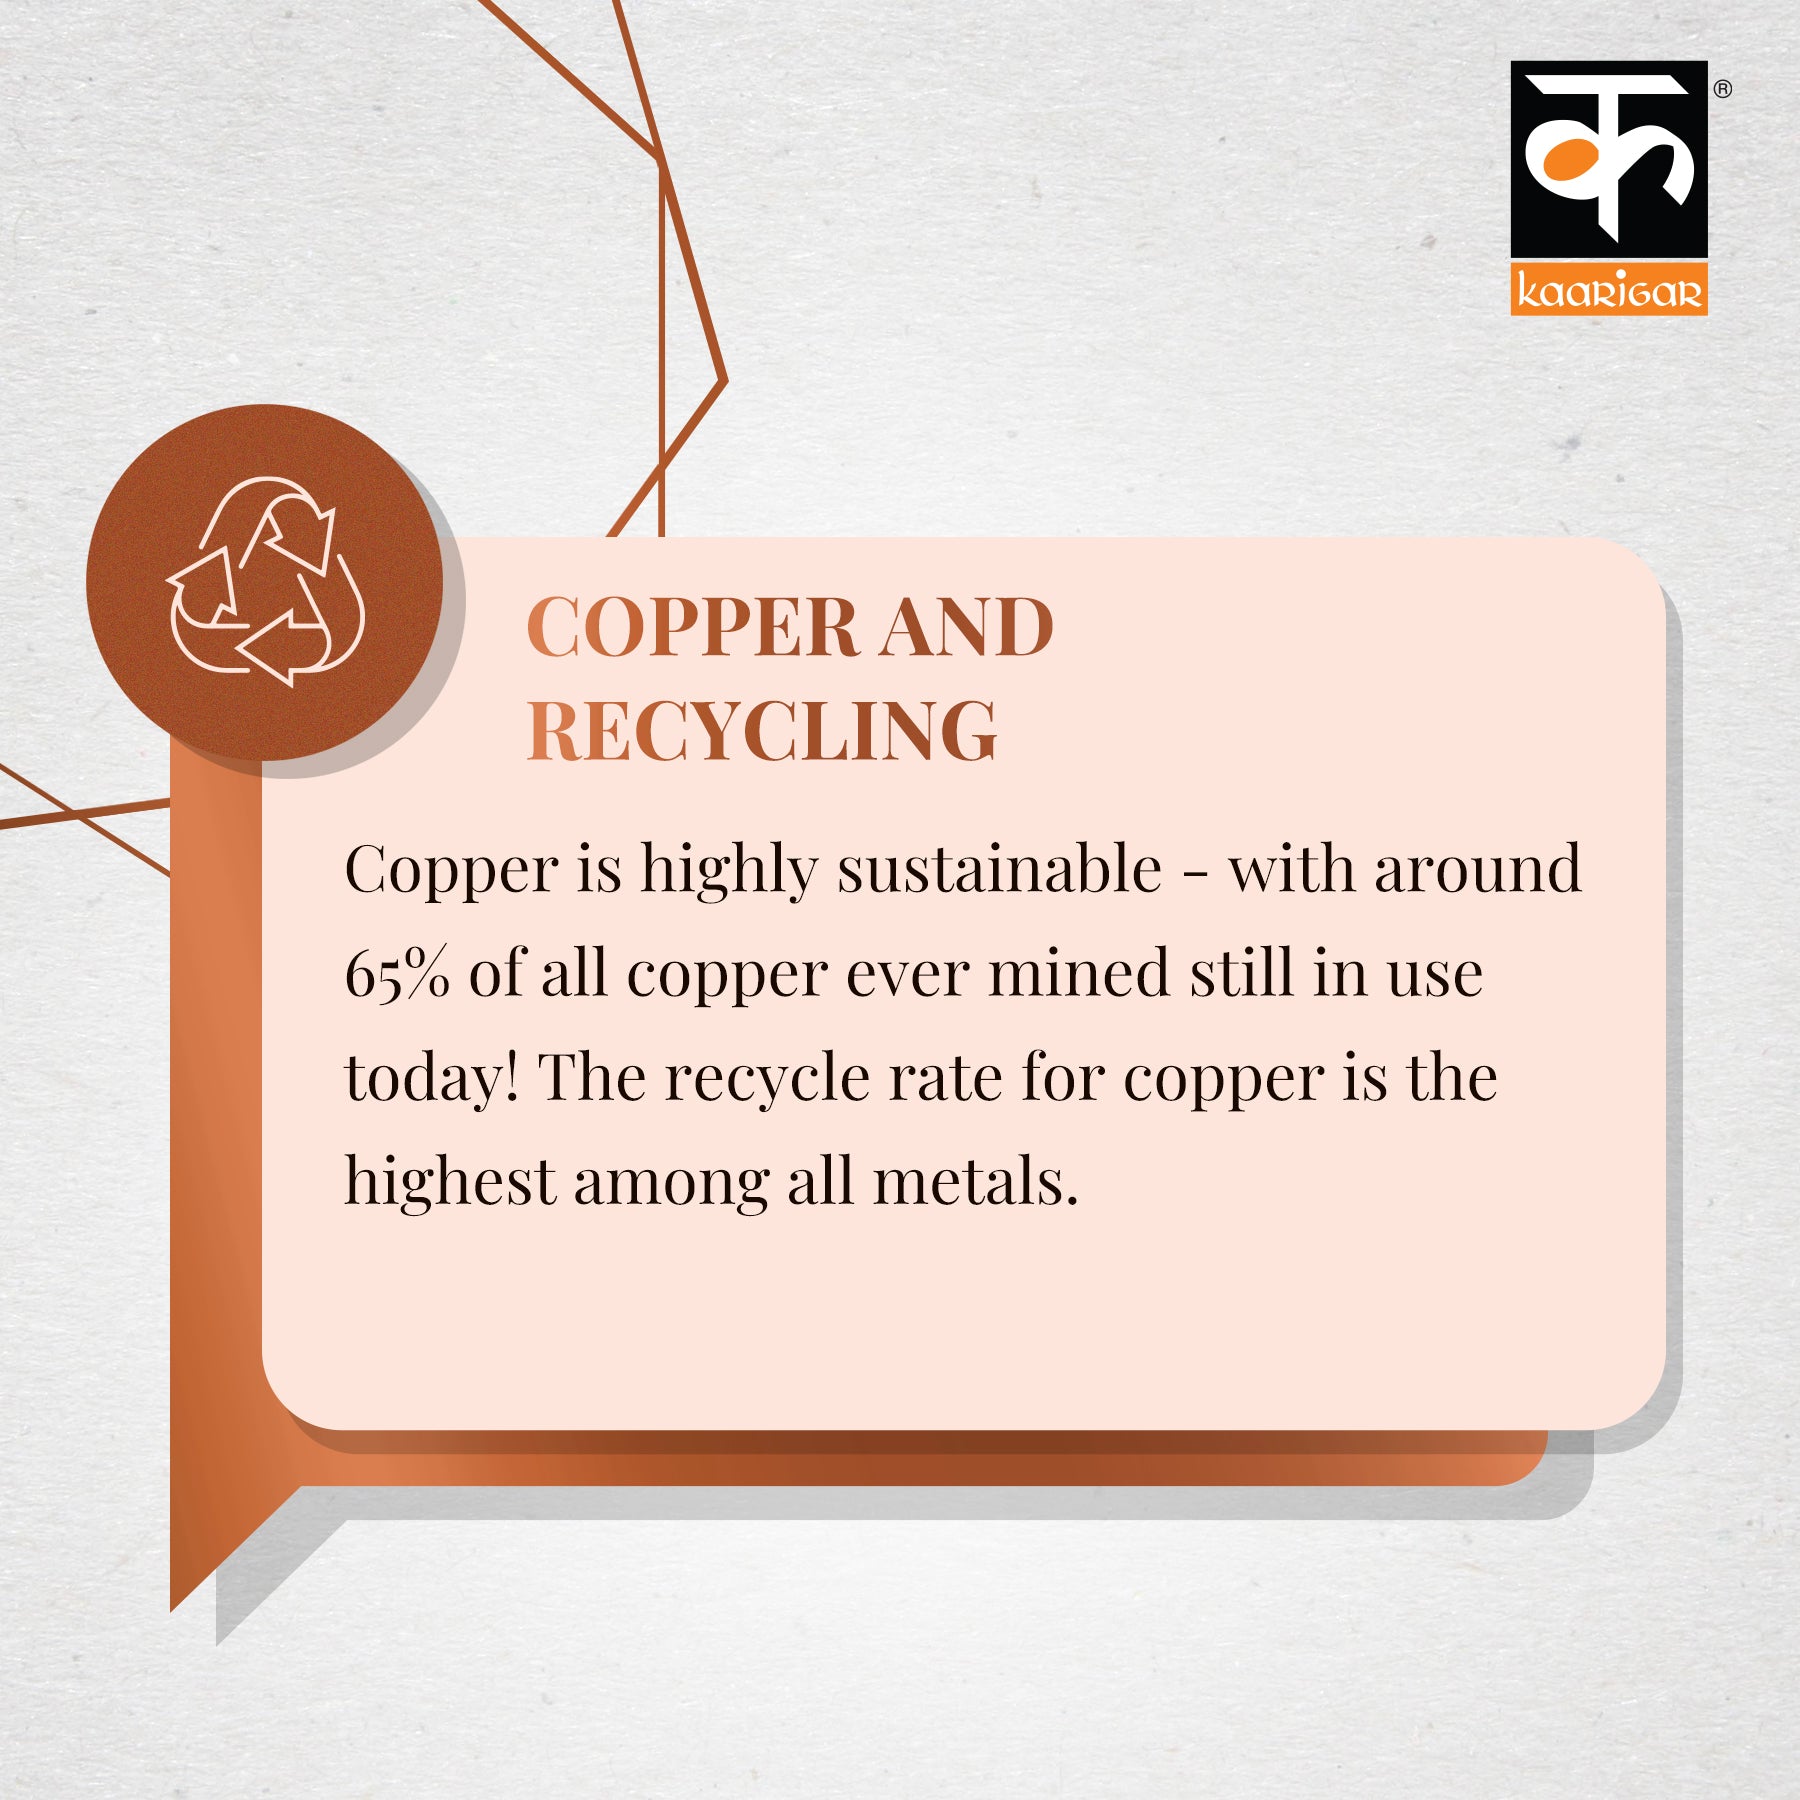  Copper and Recycling